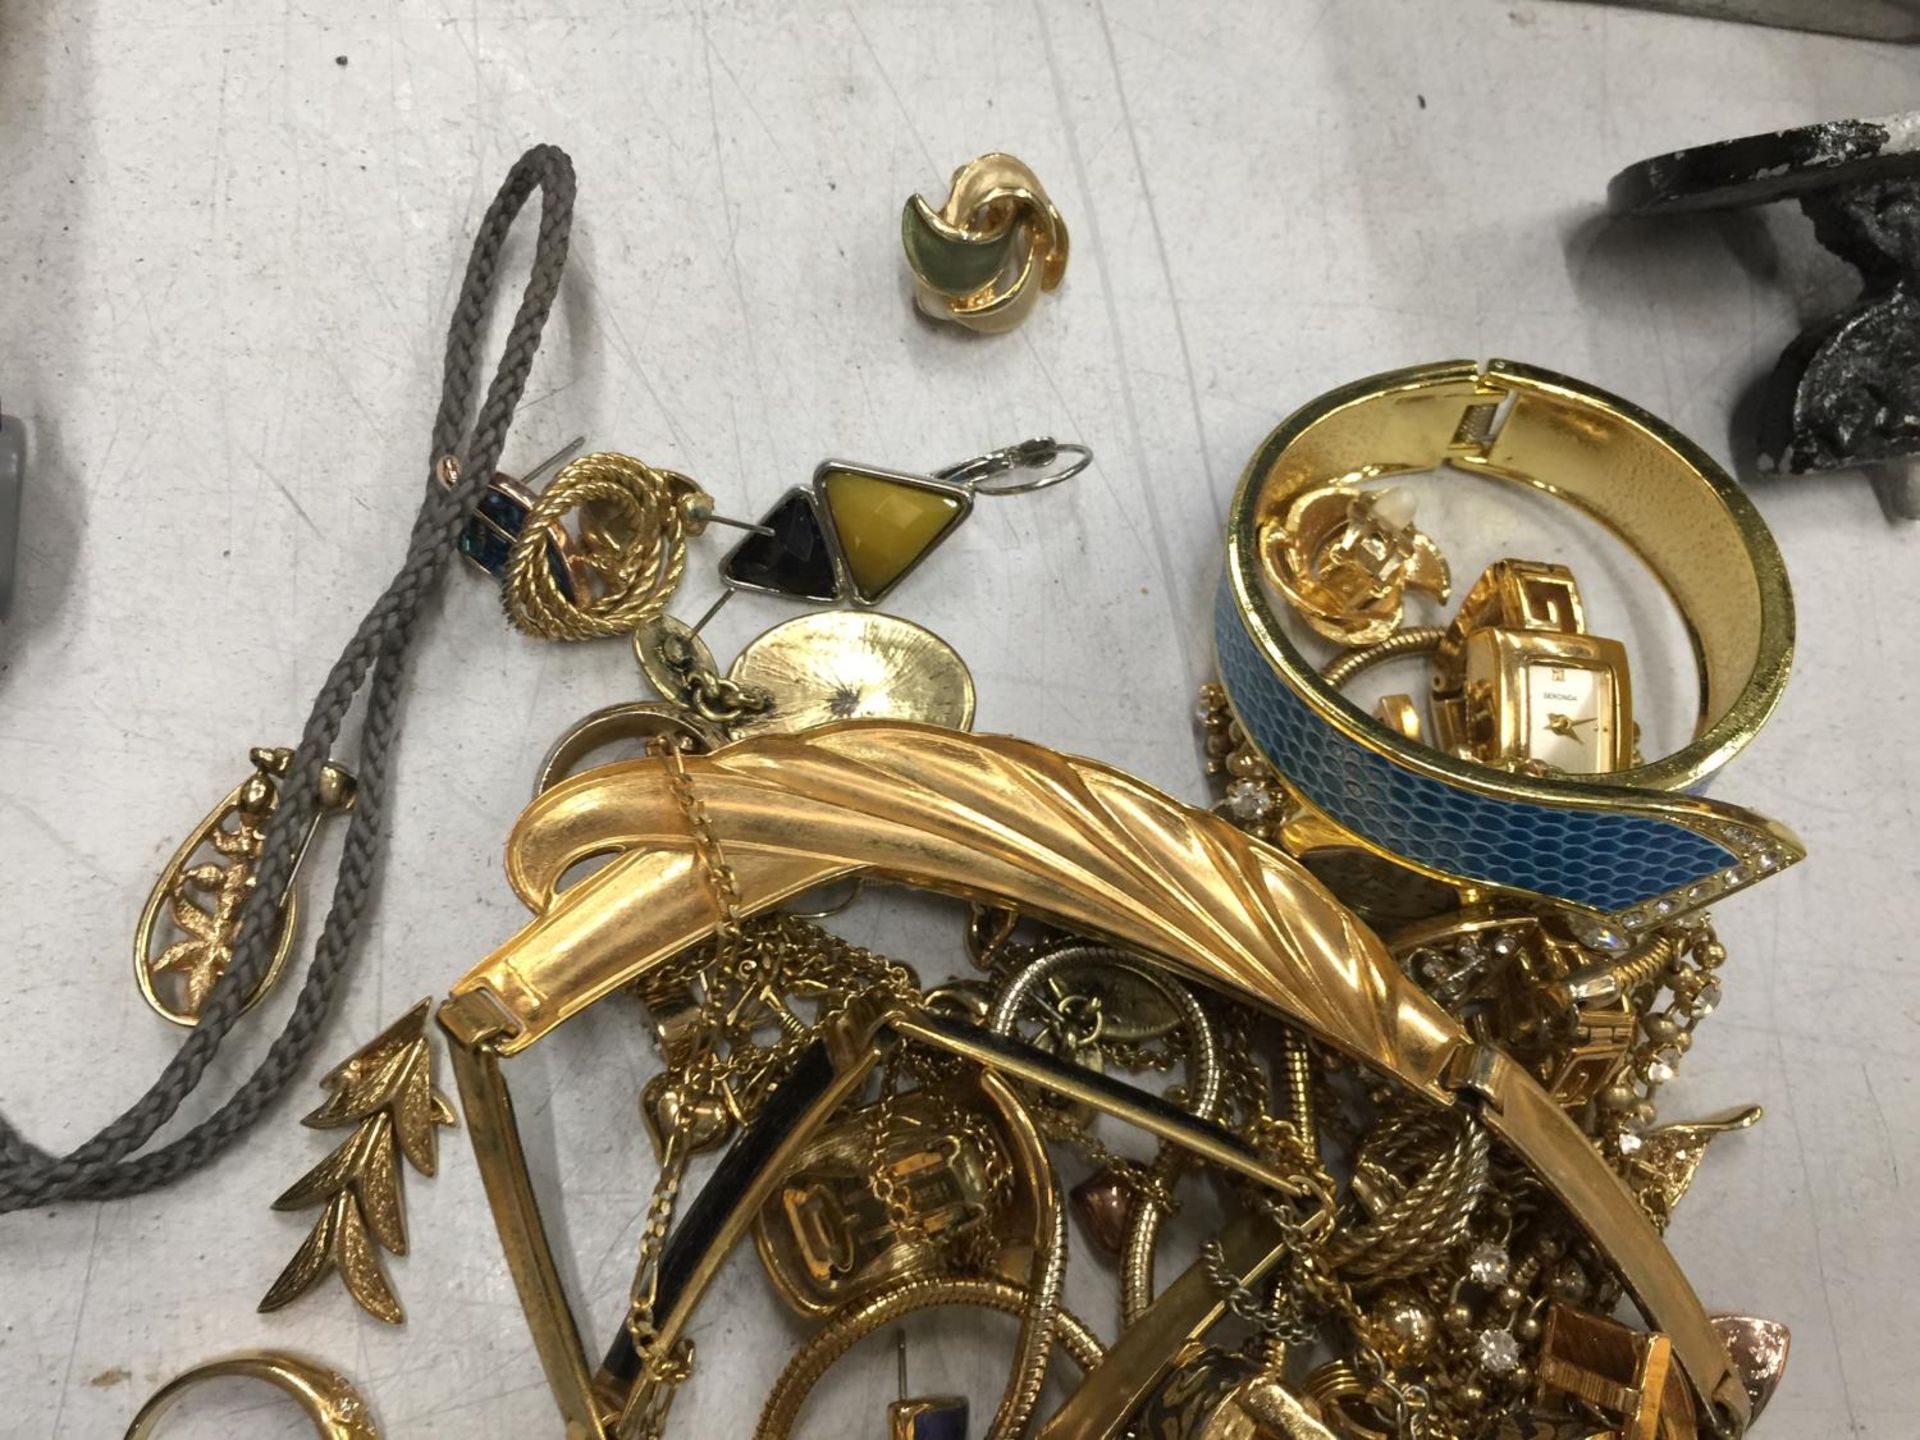 A QUANTITY OF YELLOW METAL COSTUME JEWELLERY TO INCLUDE CHAINS, NECKLACES, RINGS, EARRINGS, ETC - Image 6 of 6